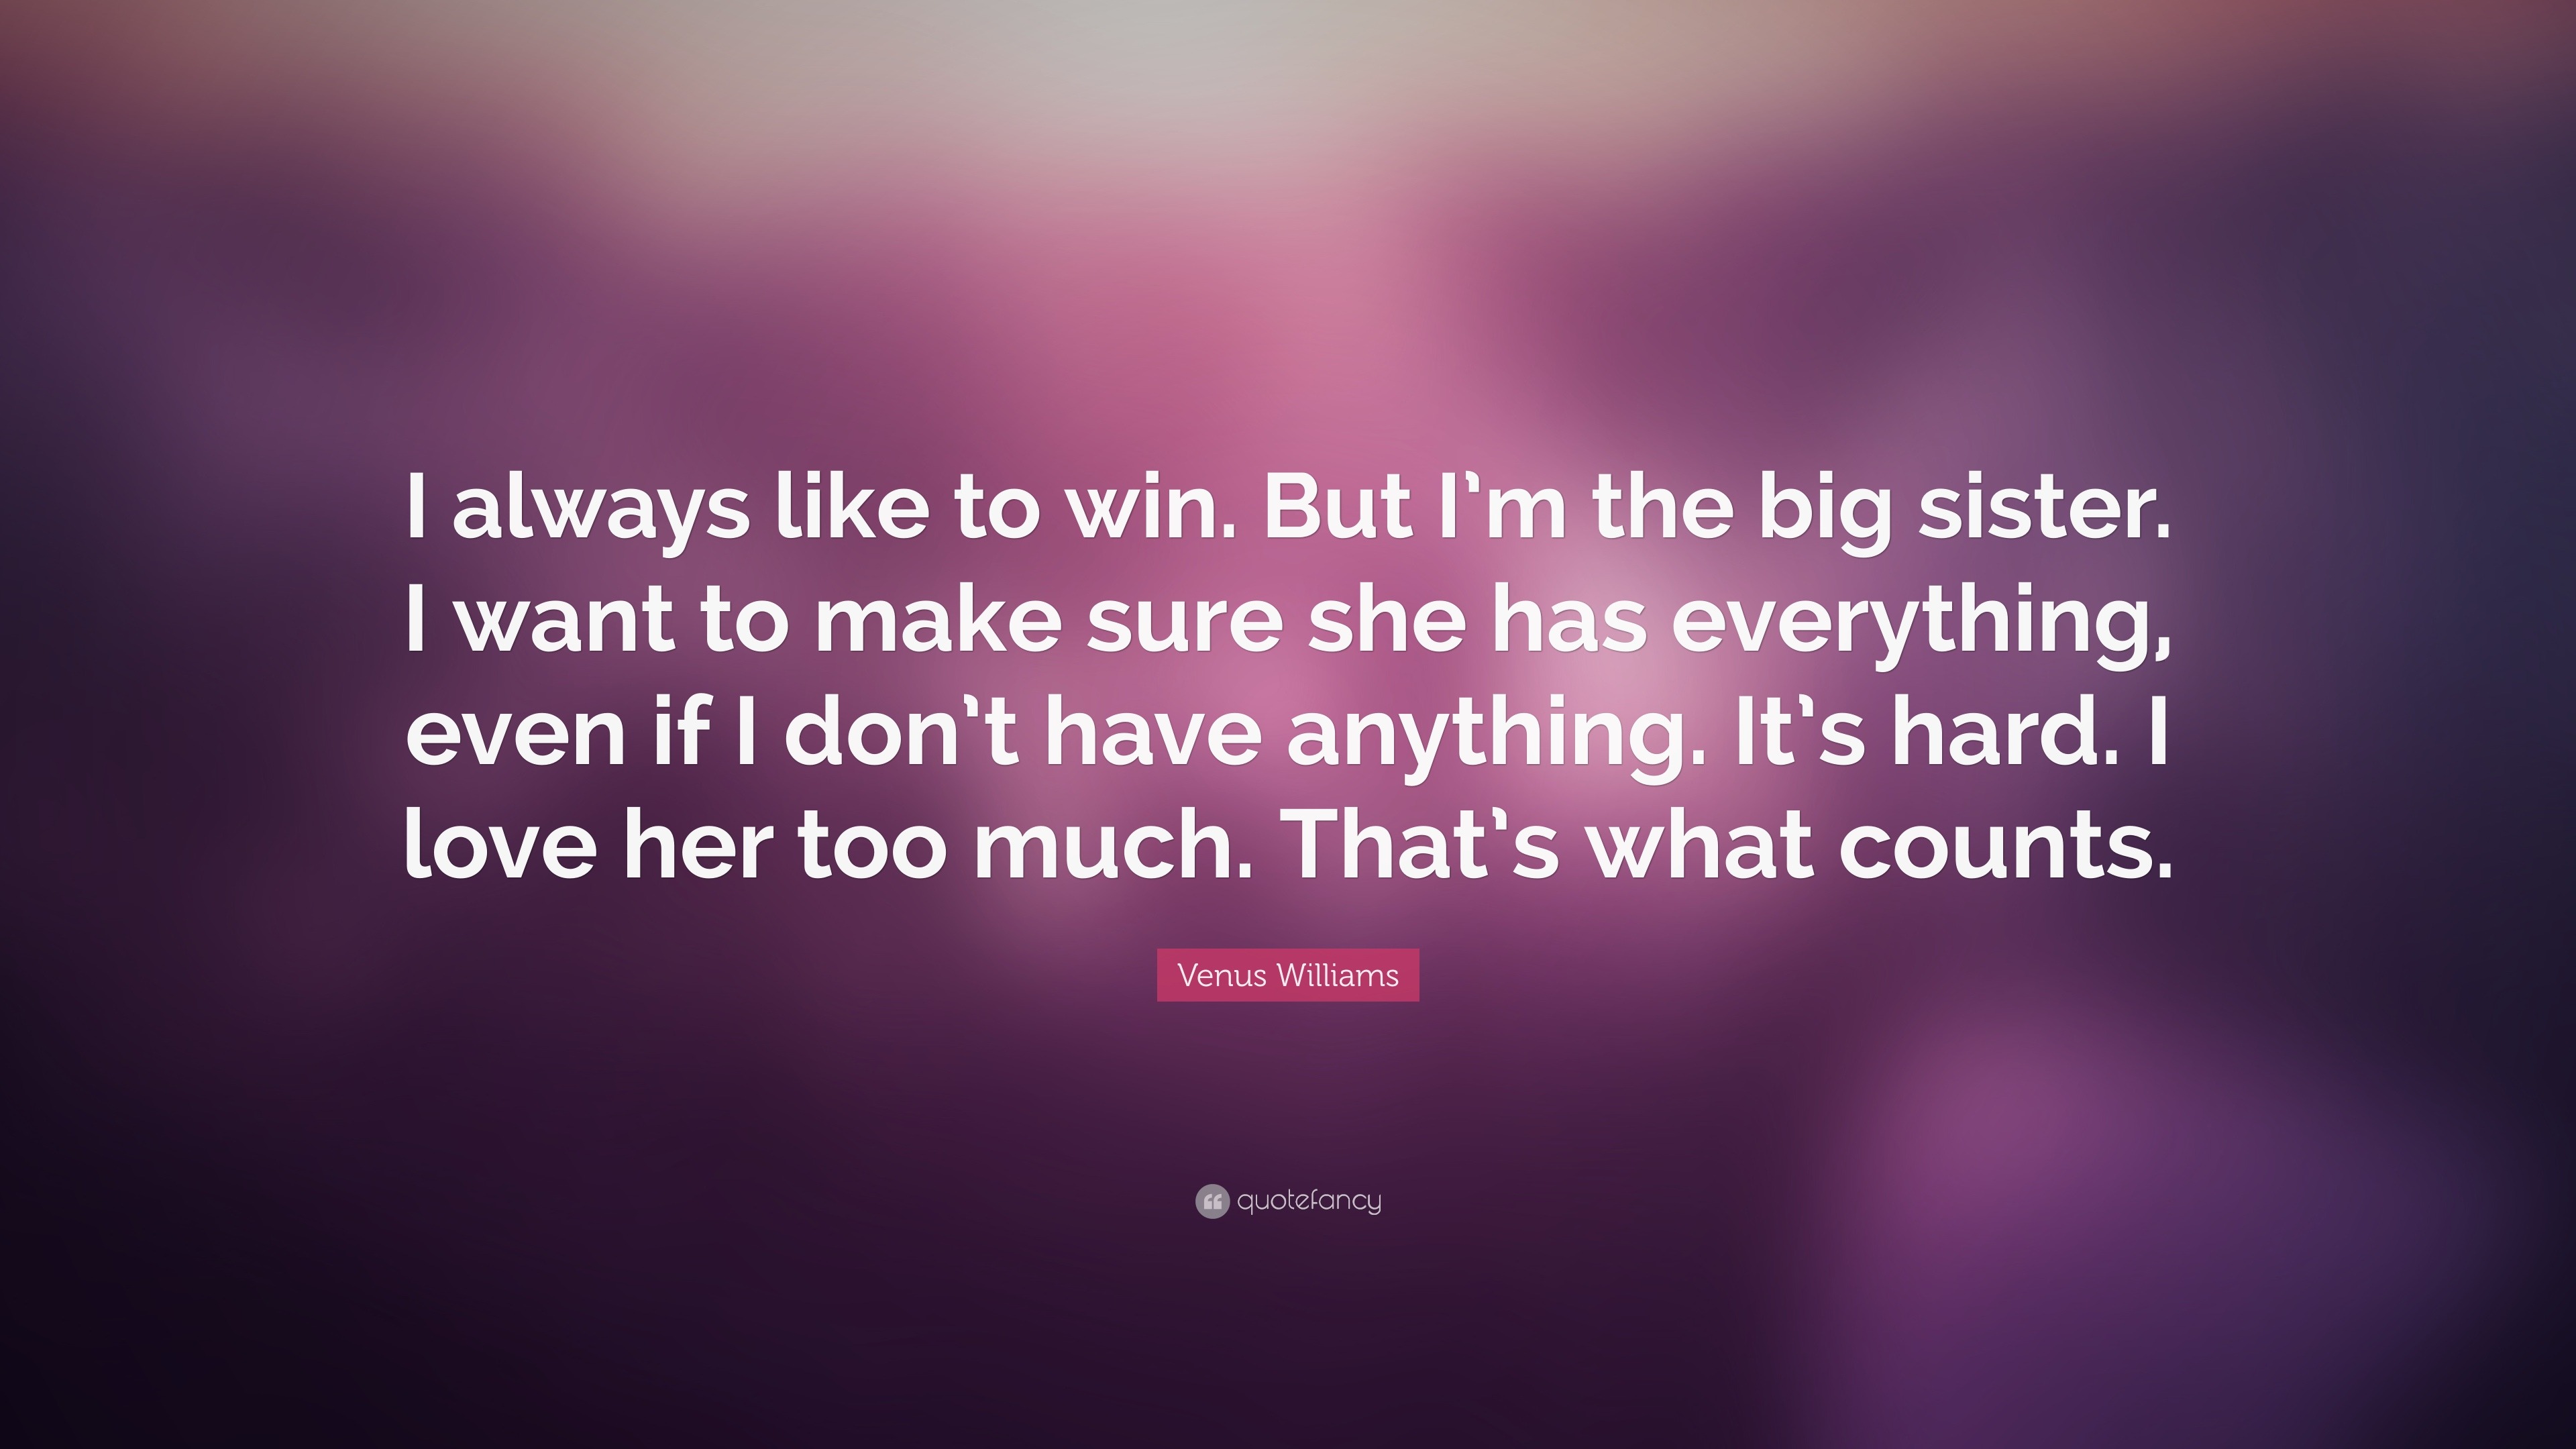 Venus Williams Quote “I always like to win But I m the